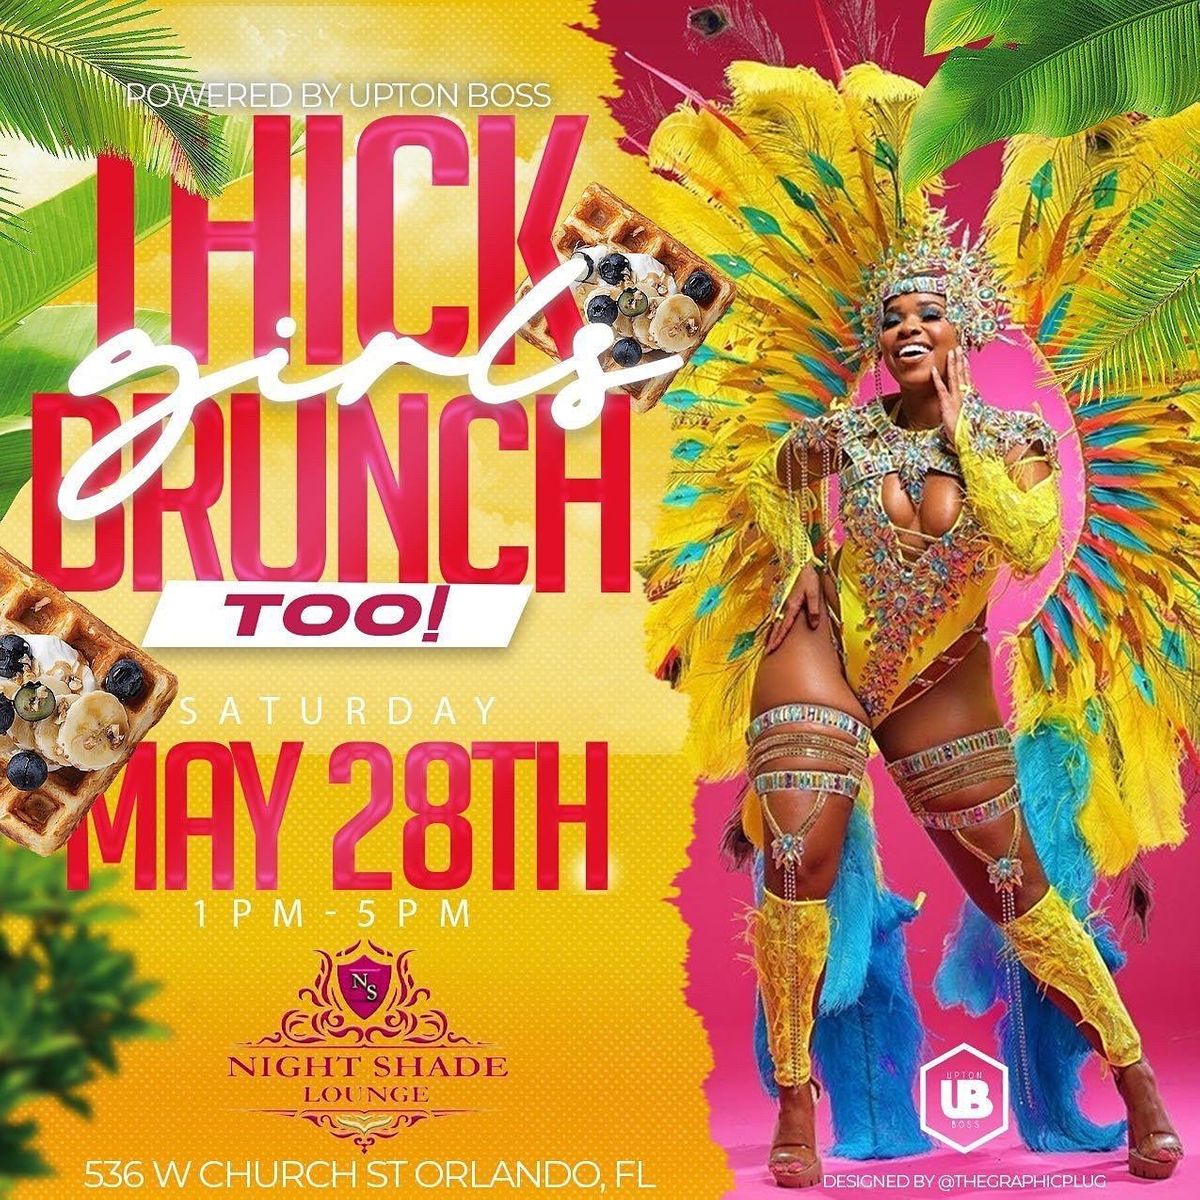 Thick Girls Brunch Too!